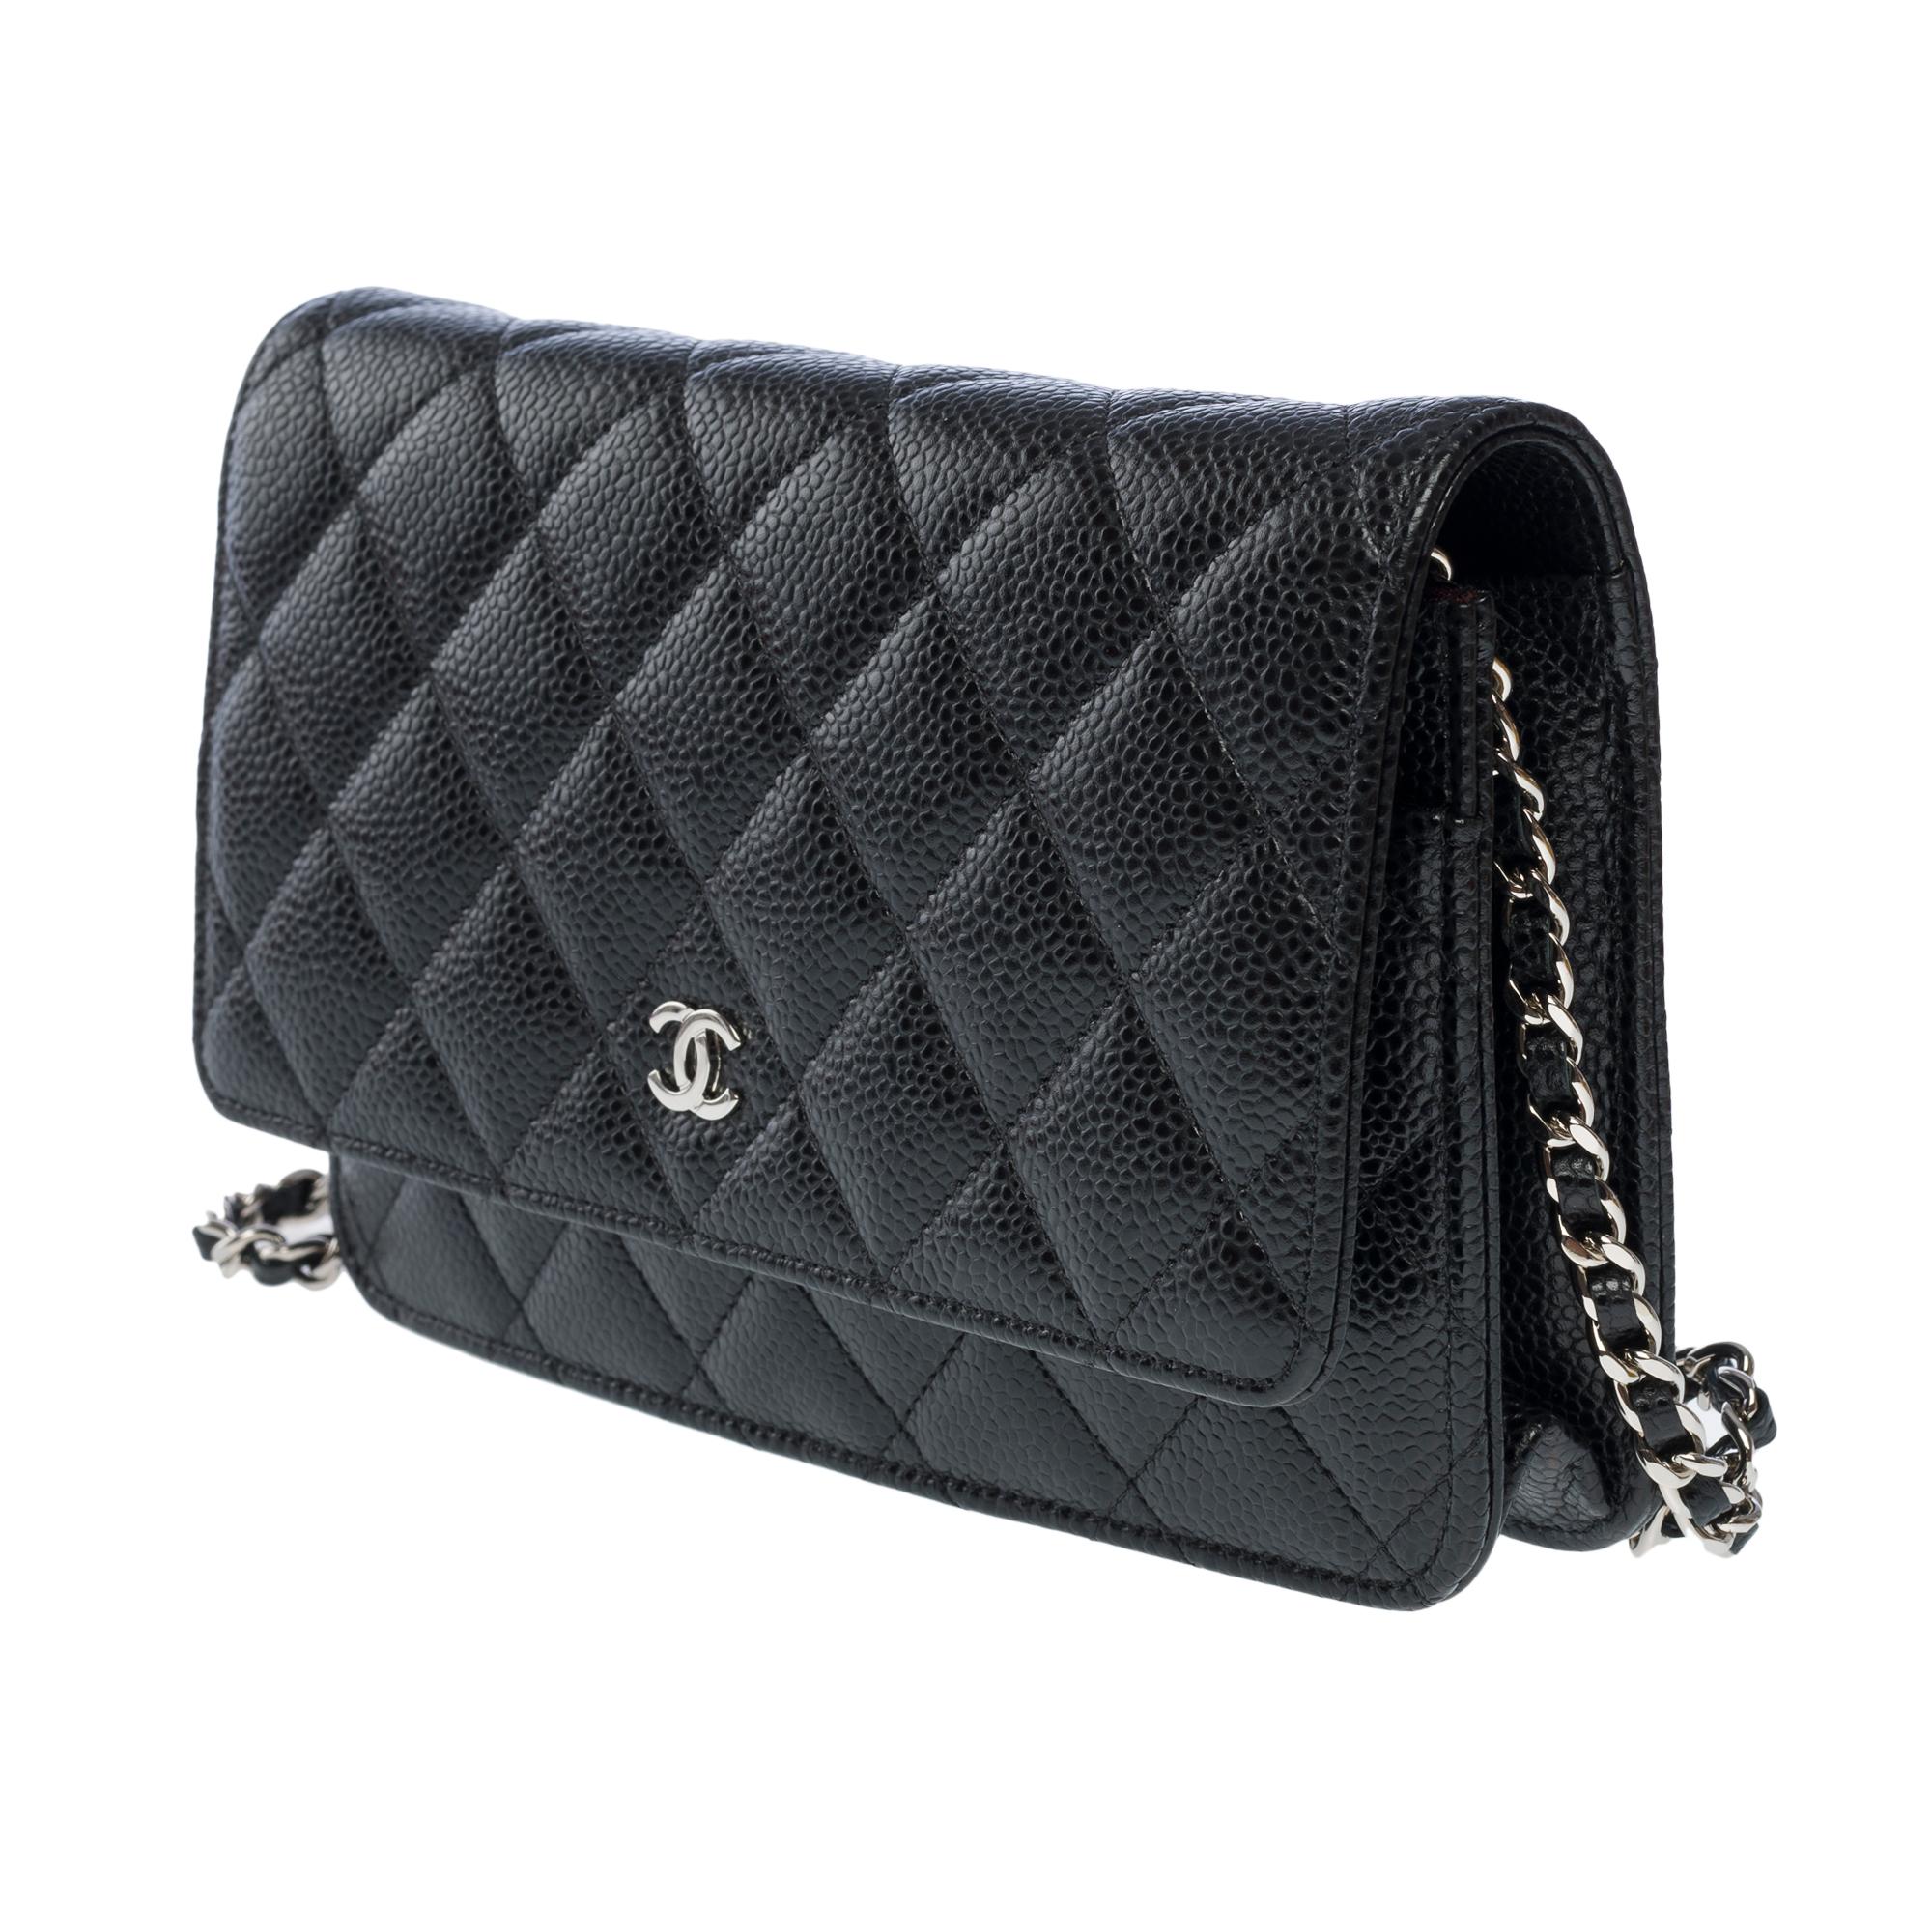 Women's Chanel Wallet on Chain (WOC)  shoulder bag in black Caviar quilted leather, SHW